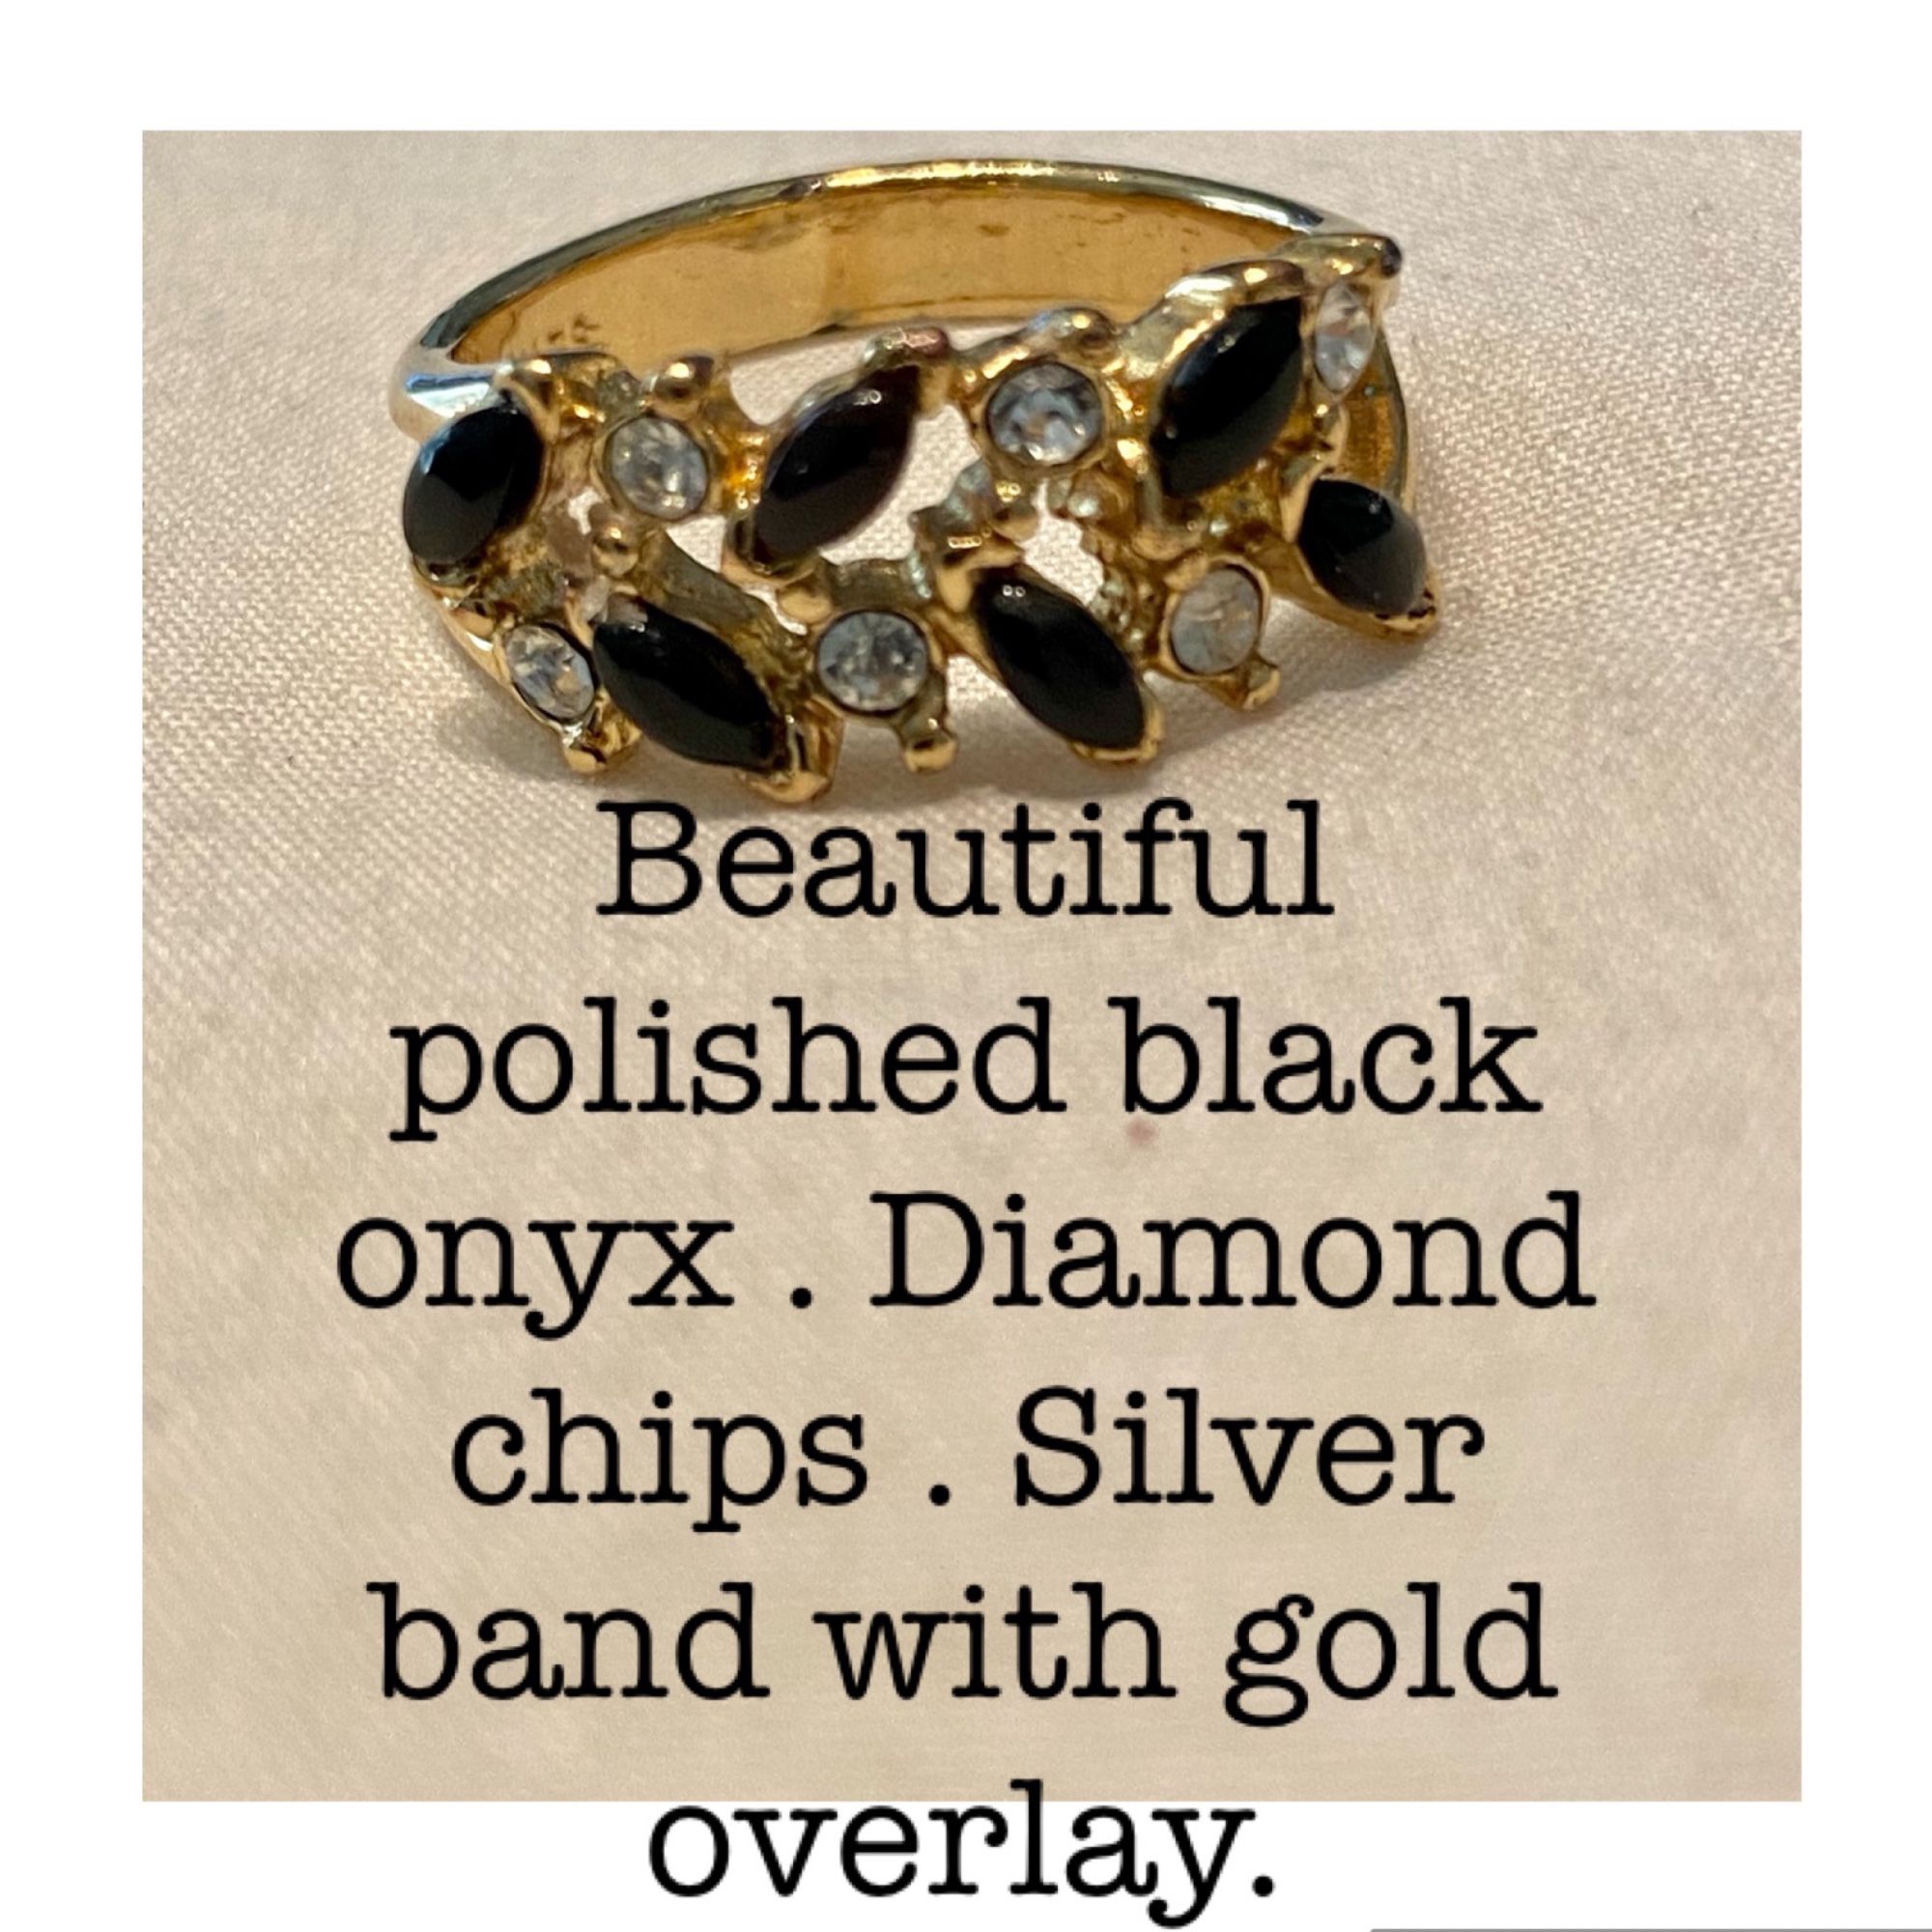 Polished black onyx with diamond chips and a silver band with a gold overlay.